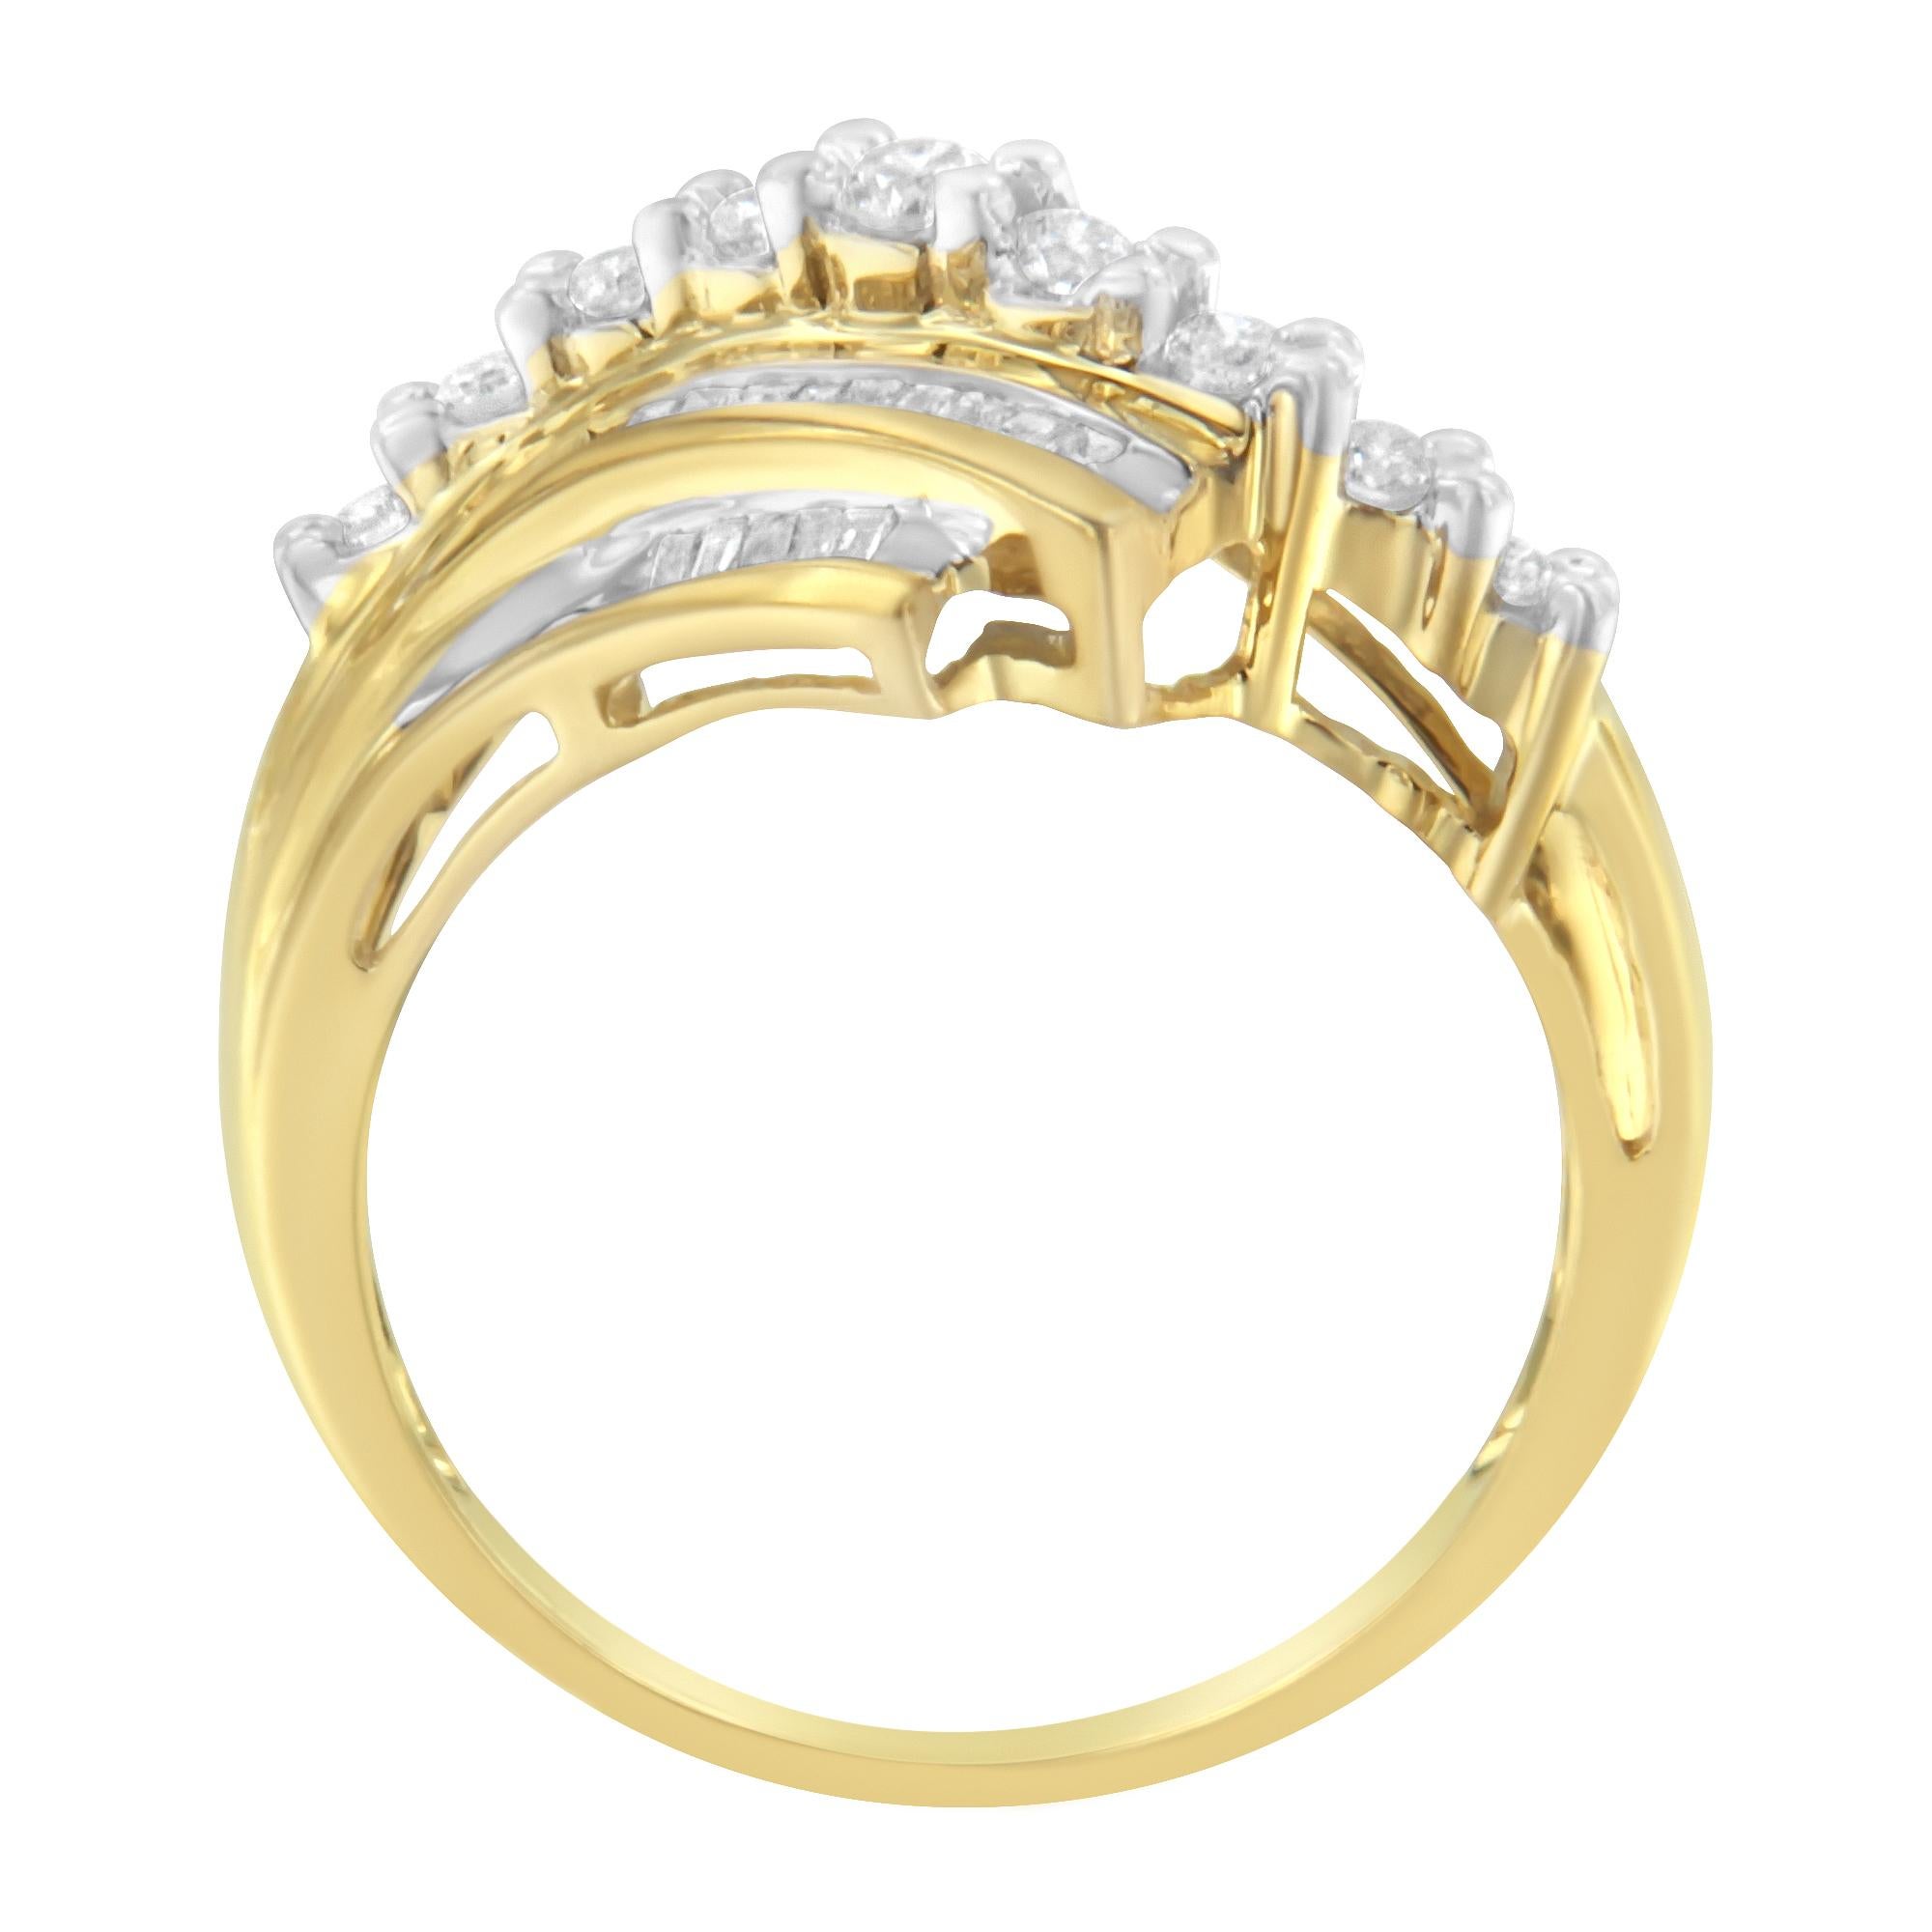 For Sale:  10k Yellow Gold 1/2 Carat Round and Baguette Diamond Cut Ring 5